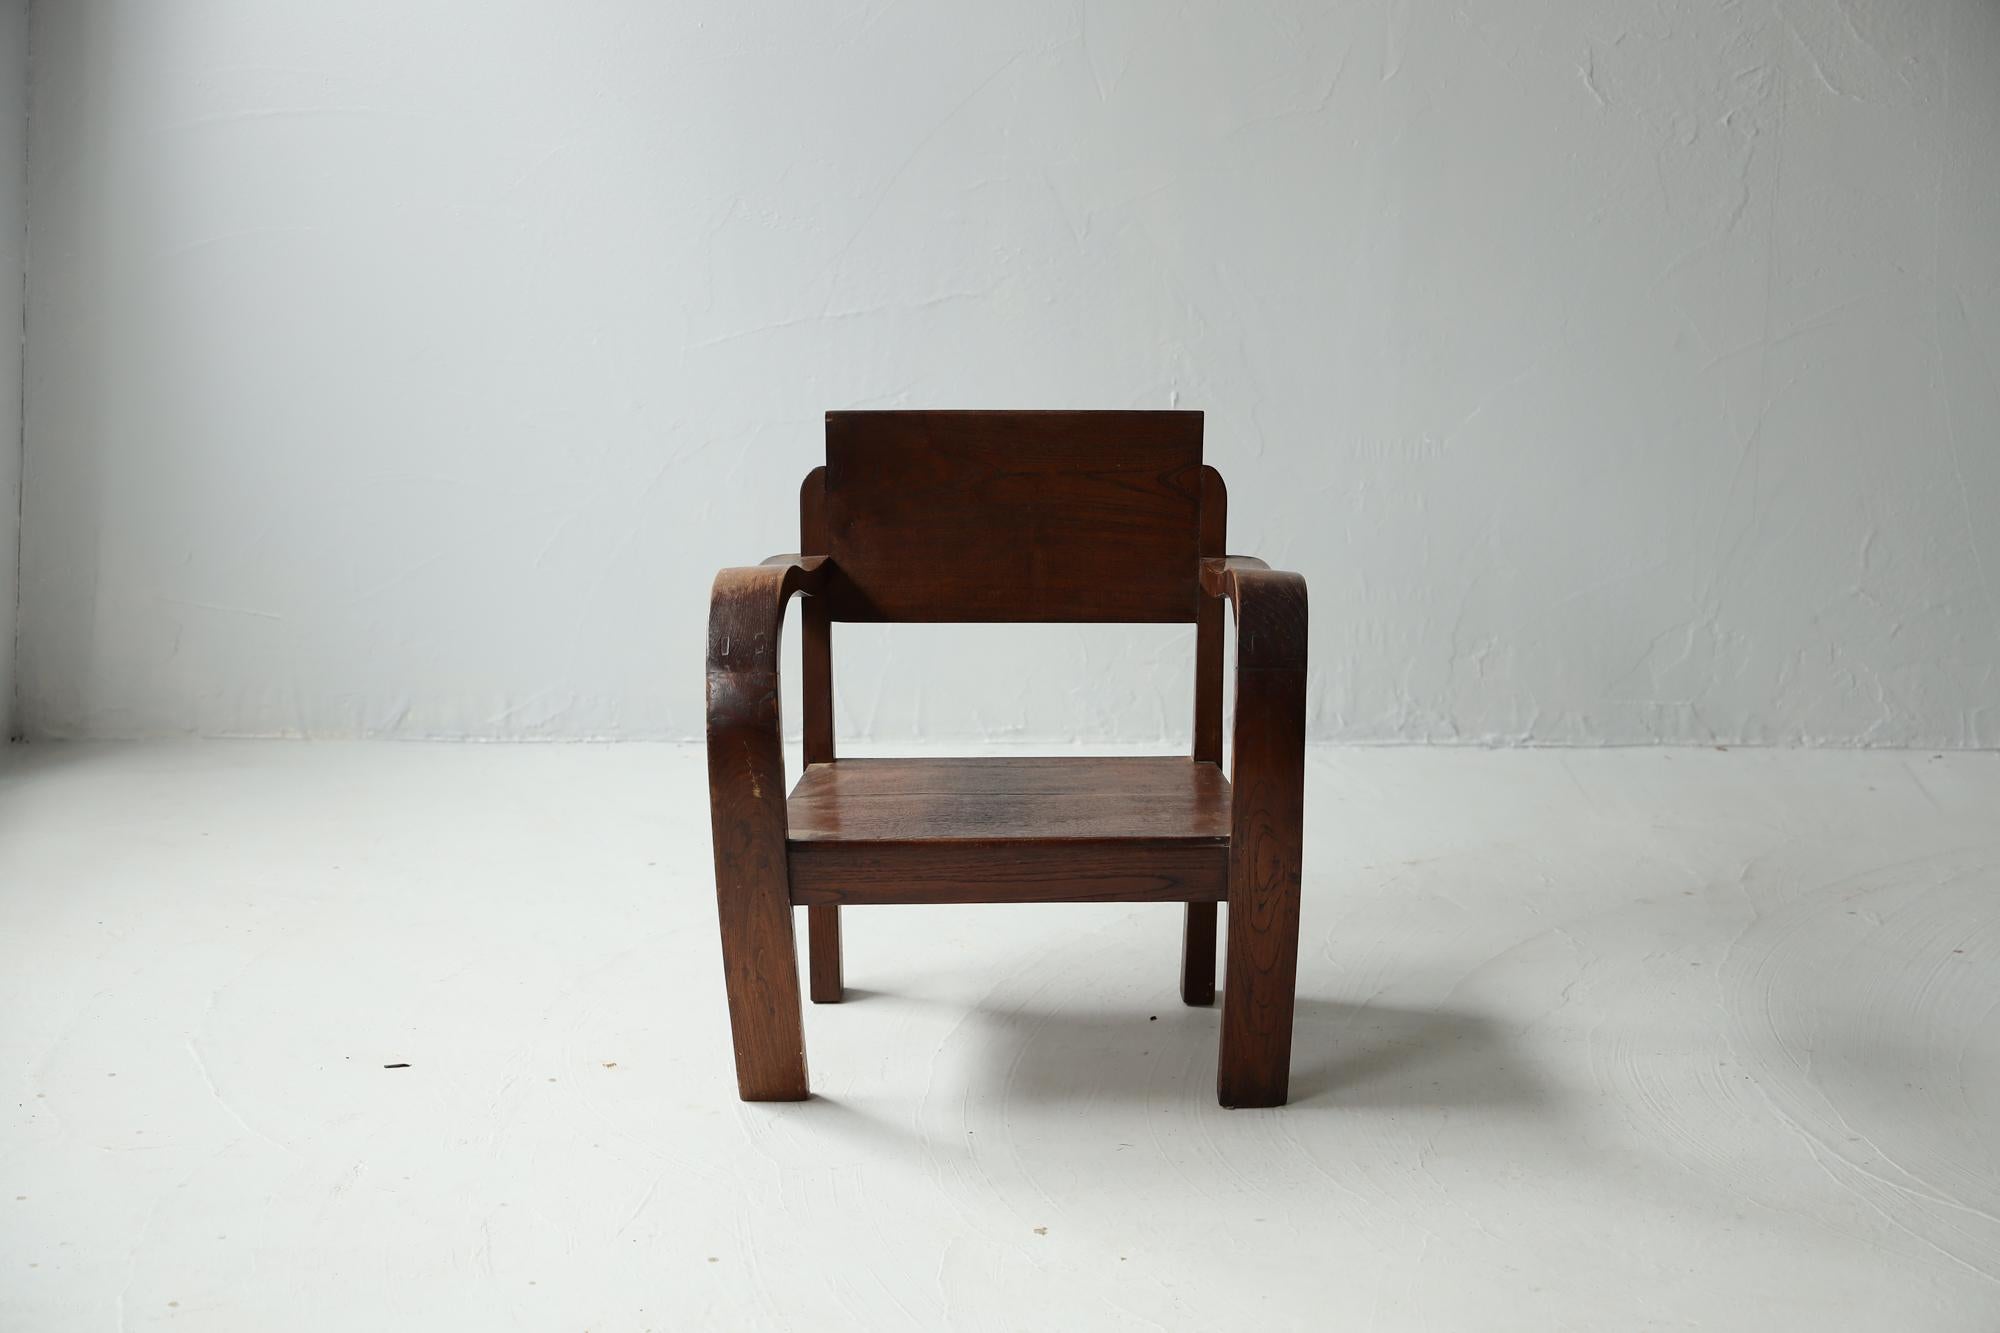 This is a Japanese chair.
It is from the Taisho period.
The material is Japanese zelkova wood.
It is rustic and tasteful, reminiscent of the world of “Wabi Sabi”.

The design is detailed but simple.
This chair is a concentrated example of the